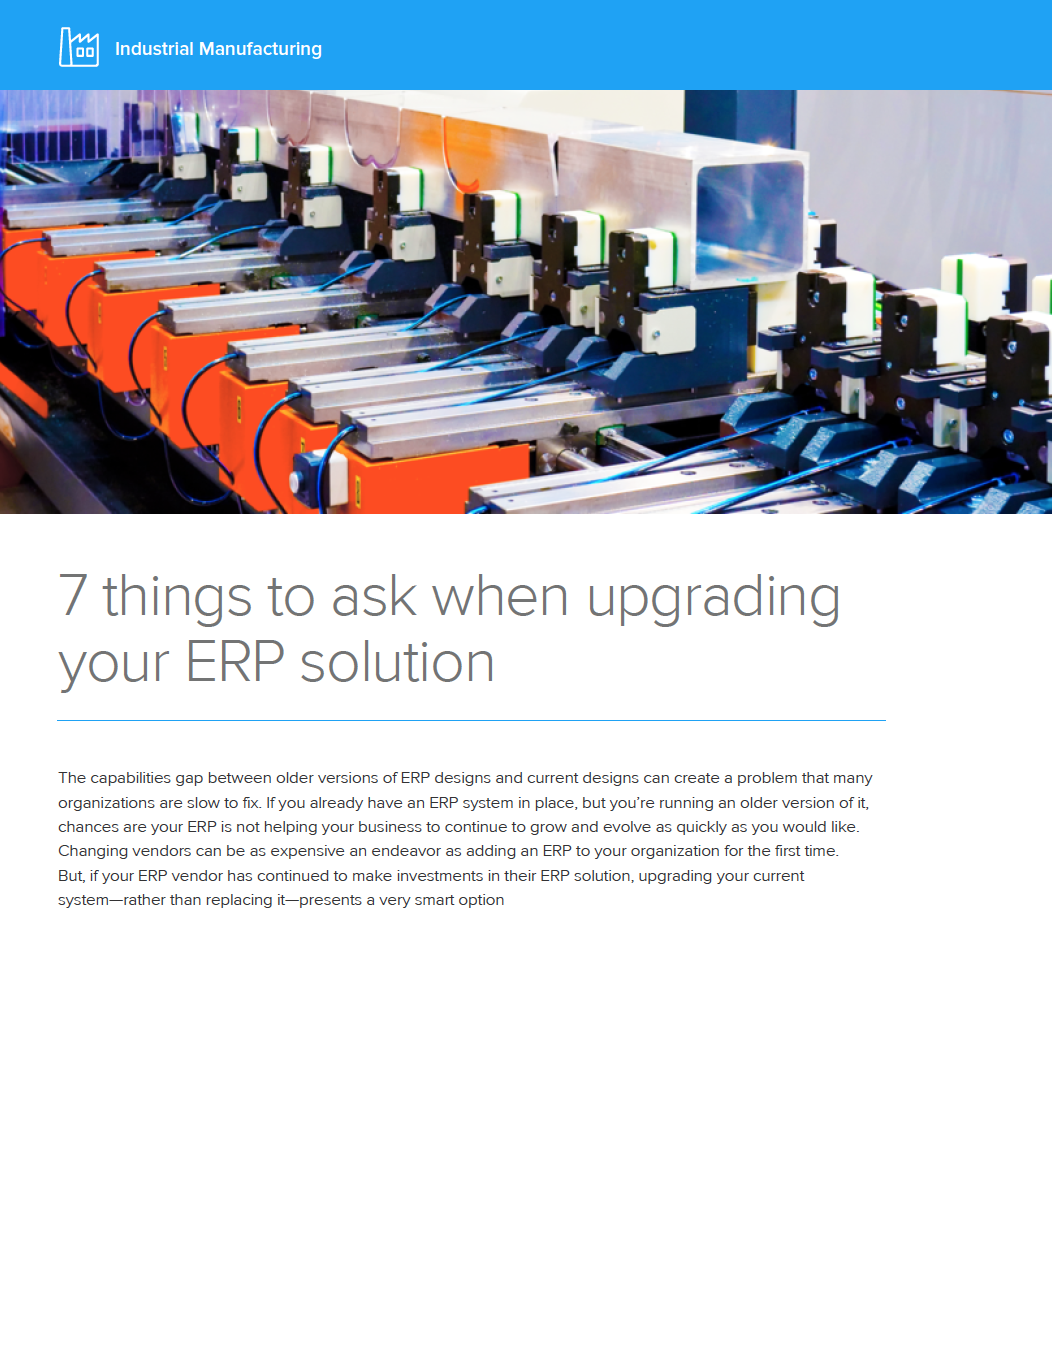 Manufacturing - 7 things to ask when upgrading your ERP solution